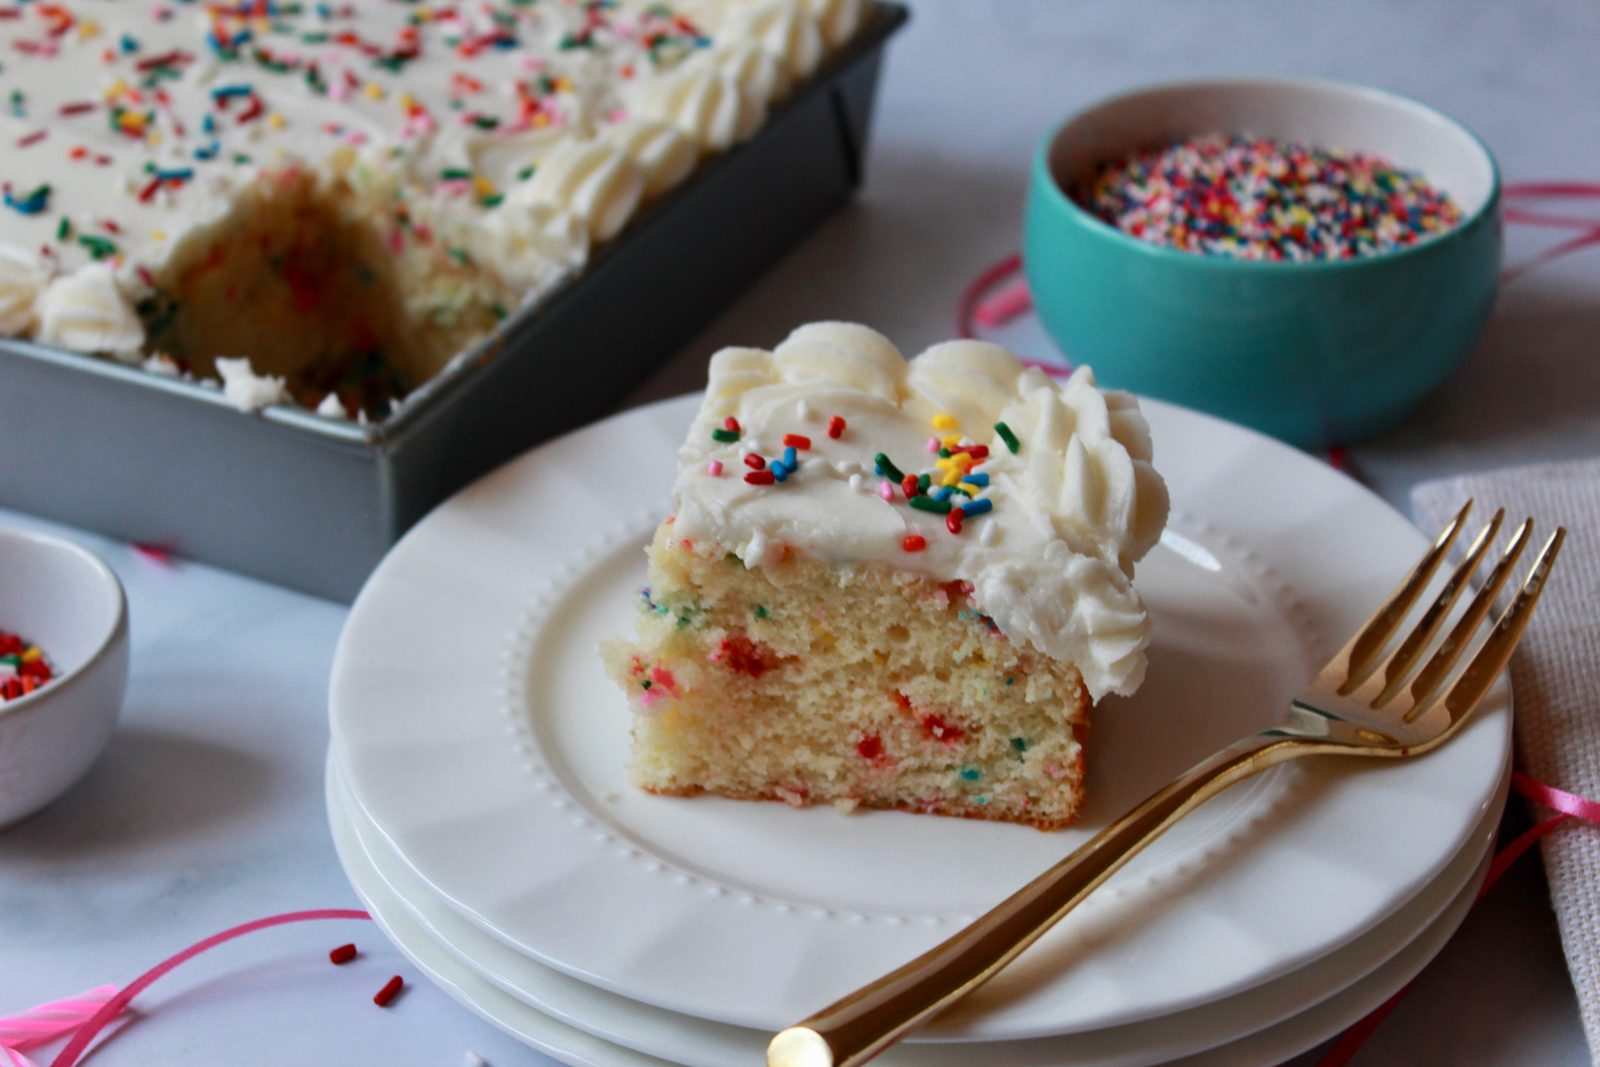 A horizontal oriented photo of a sprinkle vanilla sheet cake.  The metal pan containing the cake with a slice cut out is in the background with a slice of cake in the foreground on a stack of white plates with a gold fork.  On either side there are small bowls of sprinkles with some spilled on the white counter surface and a length of pink ribbon.